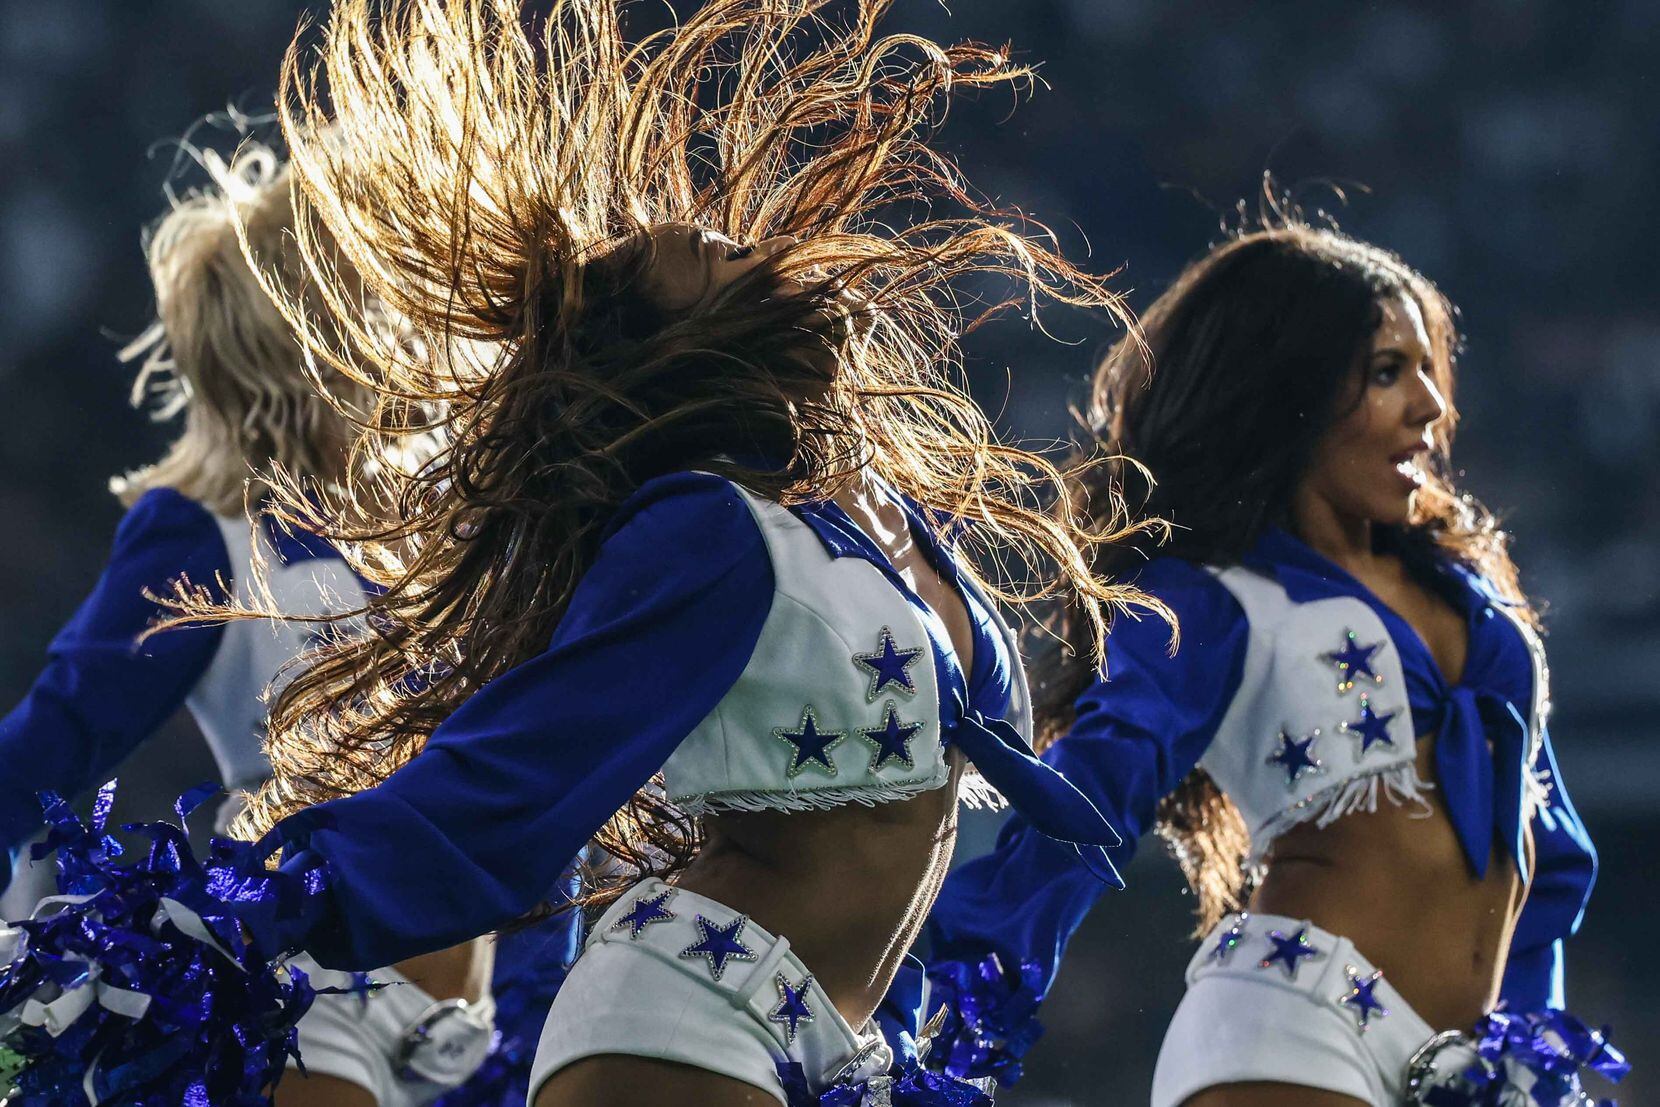 Dallas Cowboys' cheerleaders dance during the 4th quarter of the game against New York...